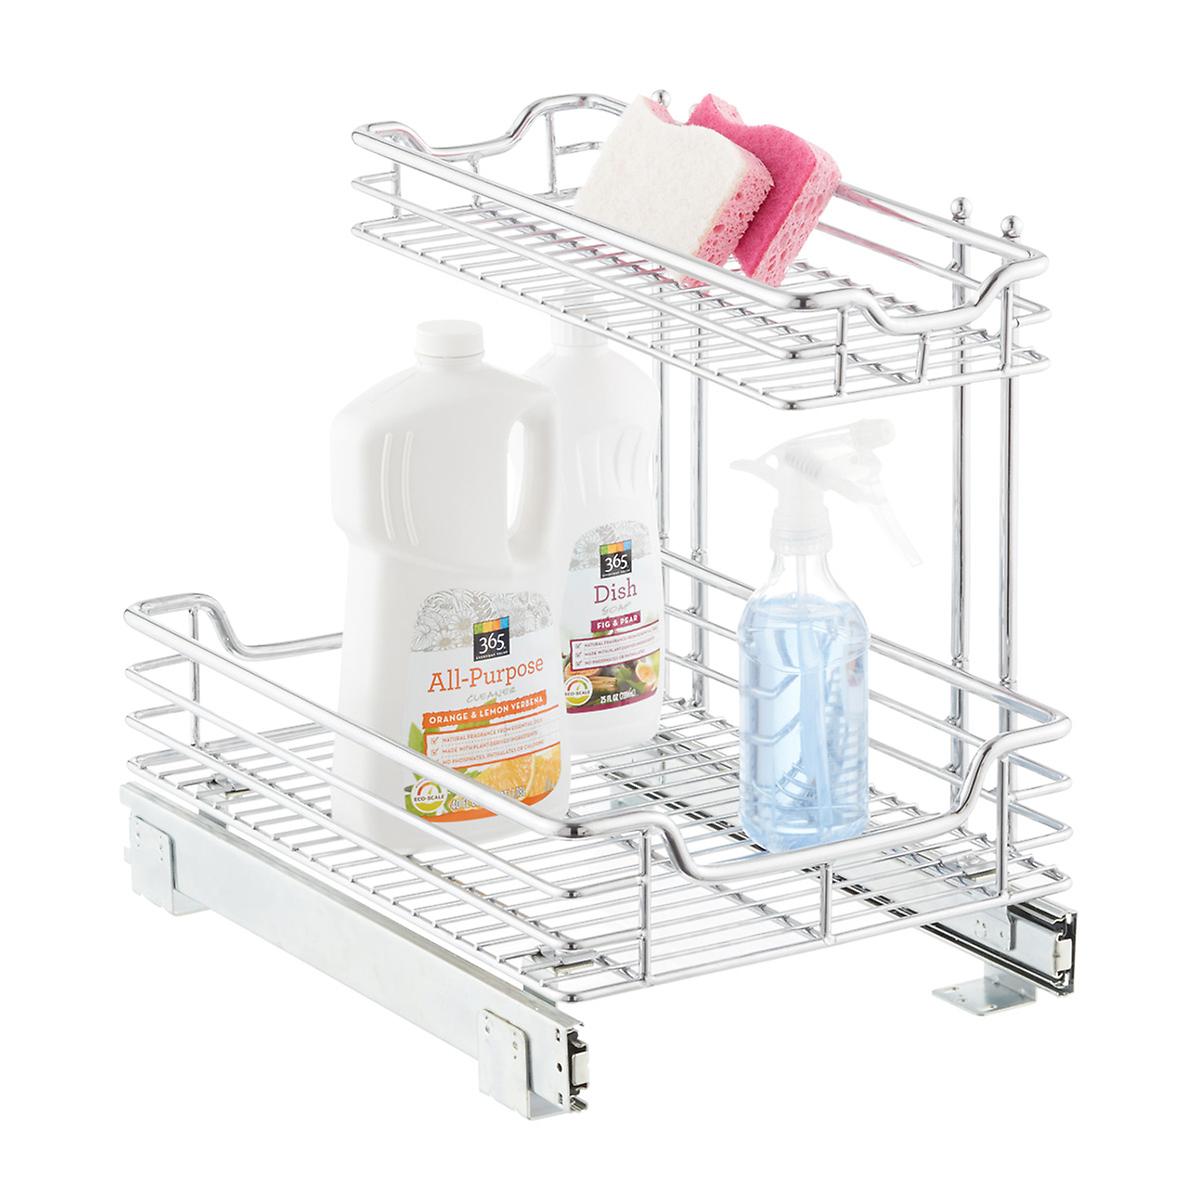 This item is a well made stainless steel shelf for under the sink kitchen organization. It makes your space under the sink very efficient. #organizing